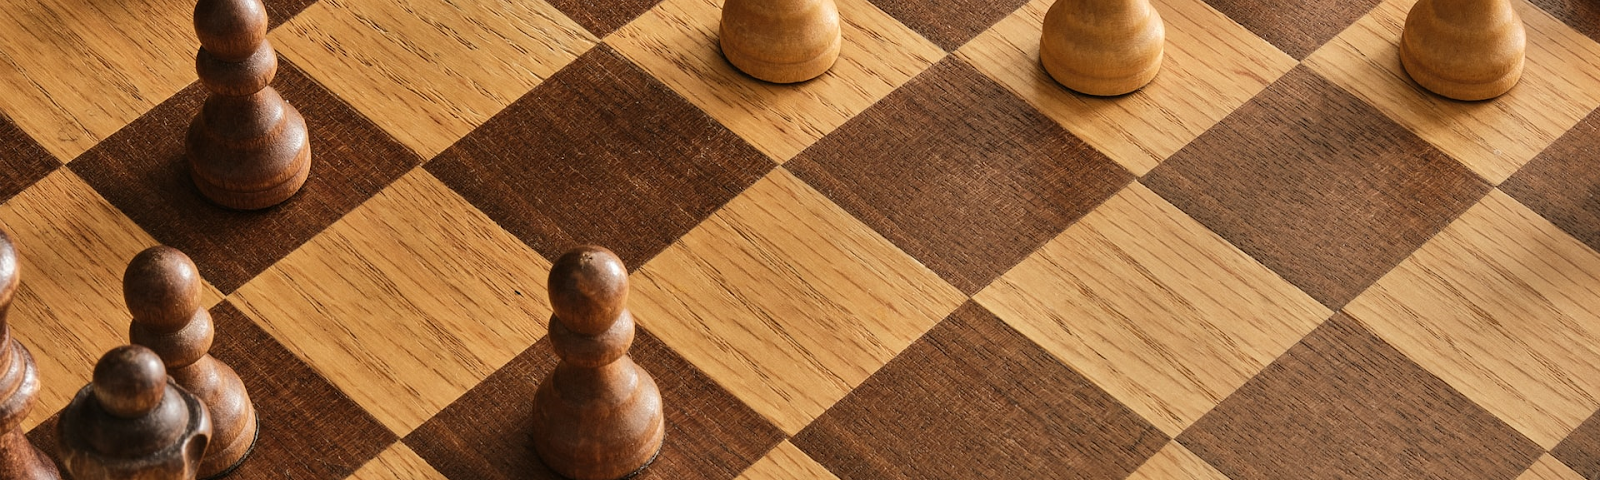 How chess makes you a better designer, by Aishwarya Rao